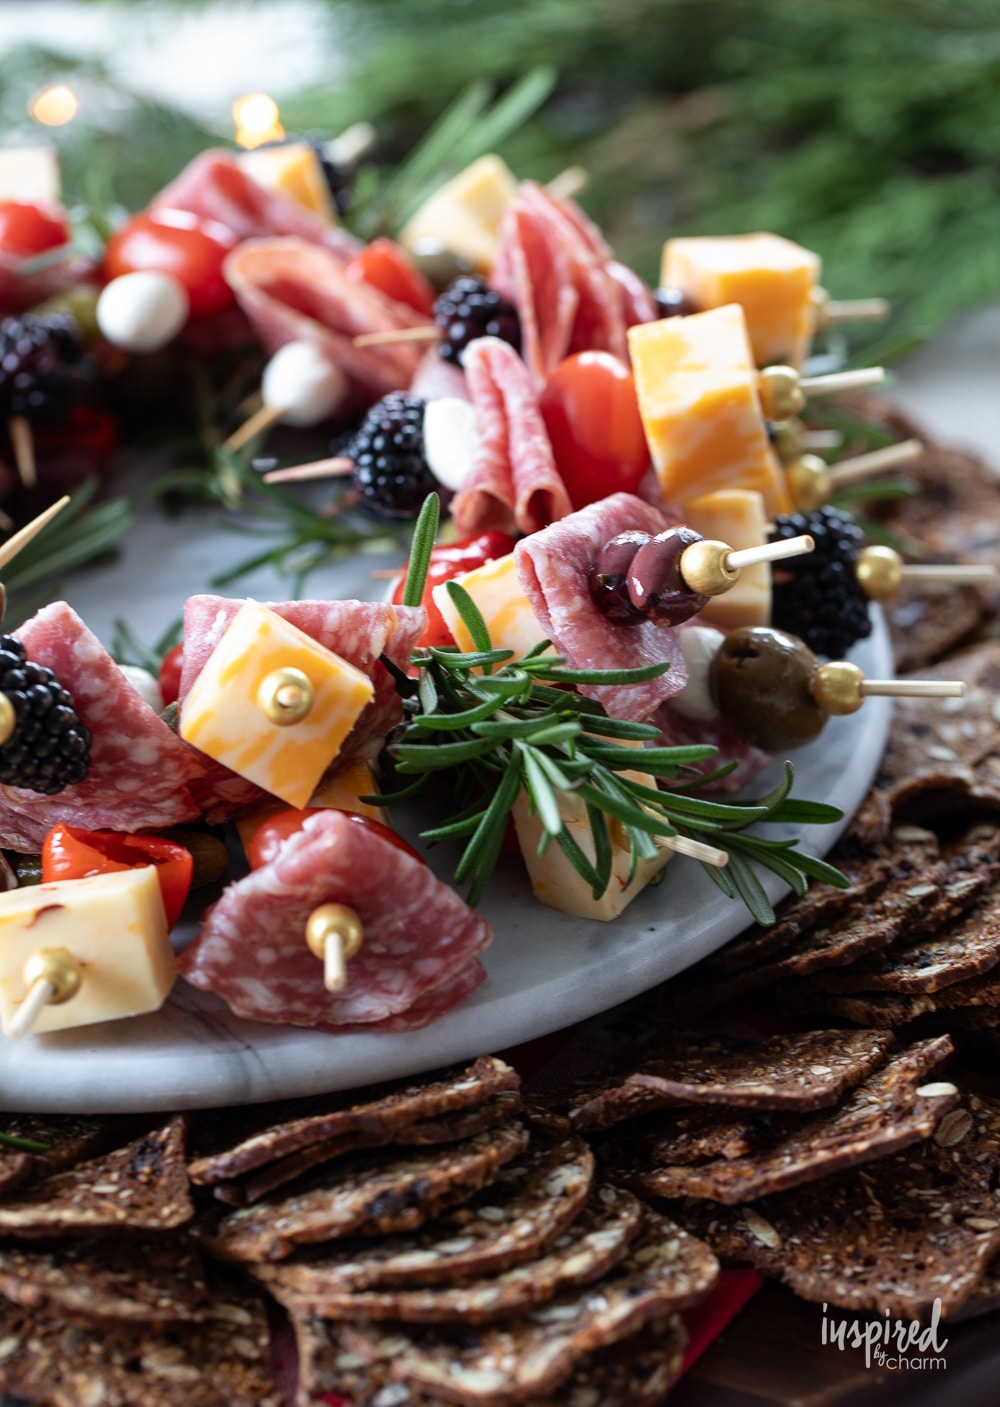 antipasto skewers on plate garnished with rosemary and crackers.